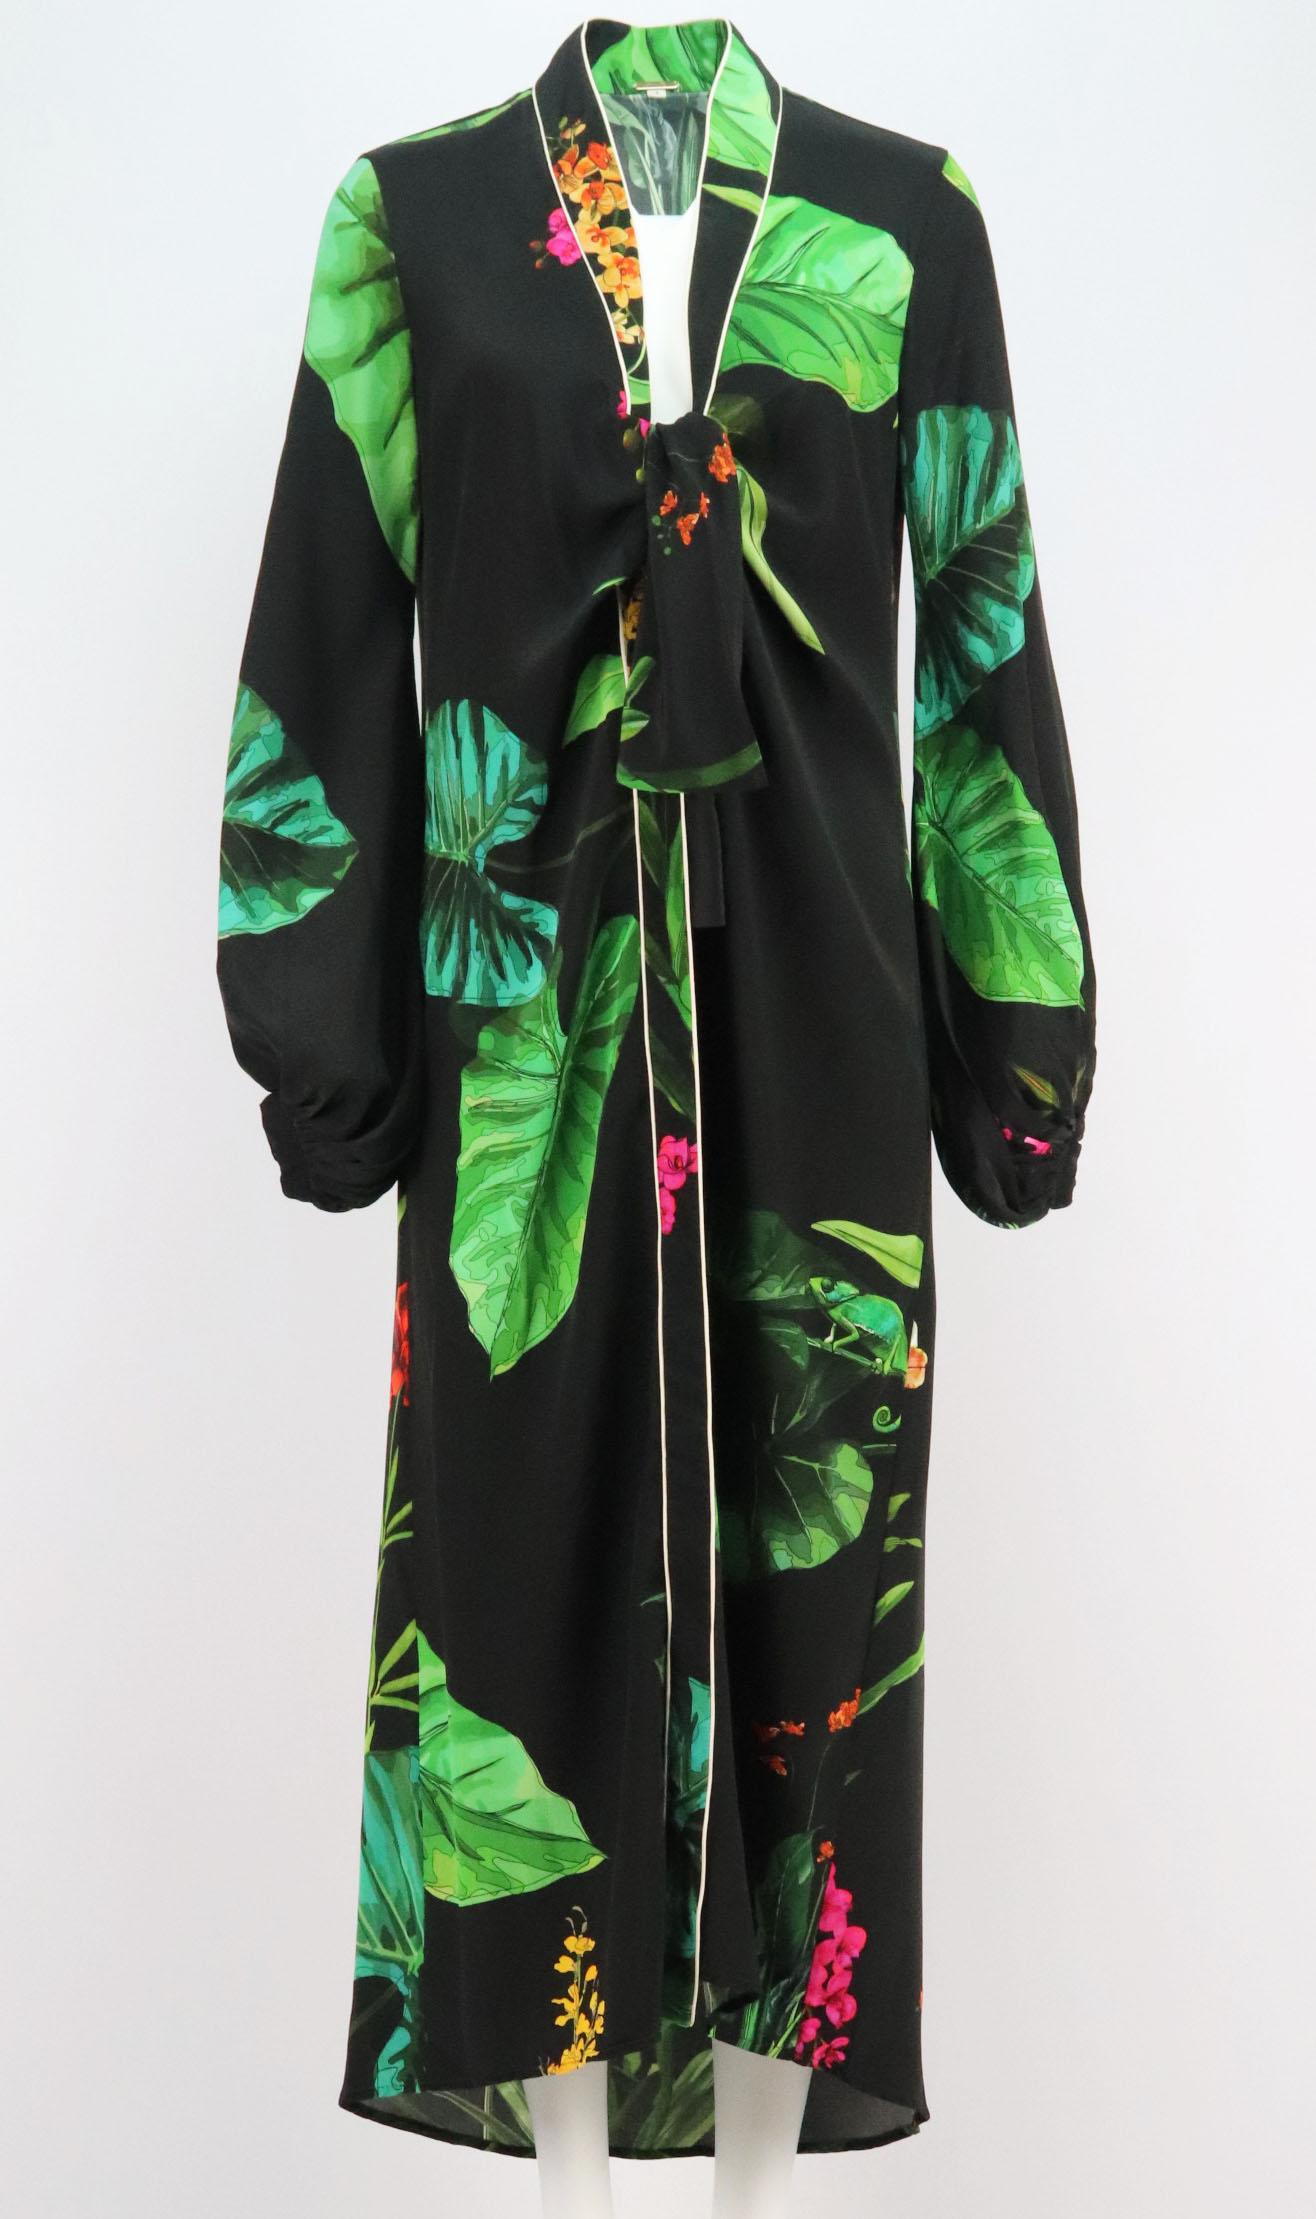 This ‘Kiribati’ kimono by Johanna Ortiz is the perfect marriage of fluid design and colourful detail, the tie-front style has been crafted from silk crêpe-de-chine and printed with a 